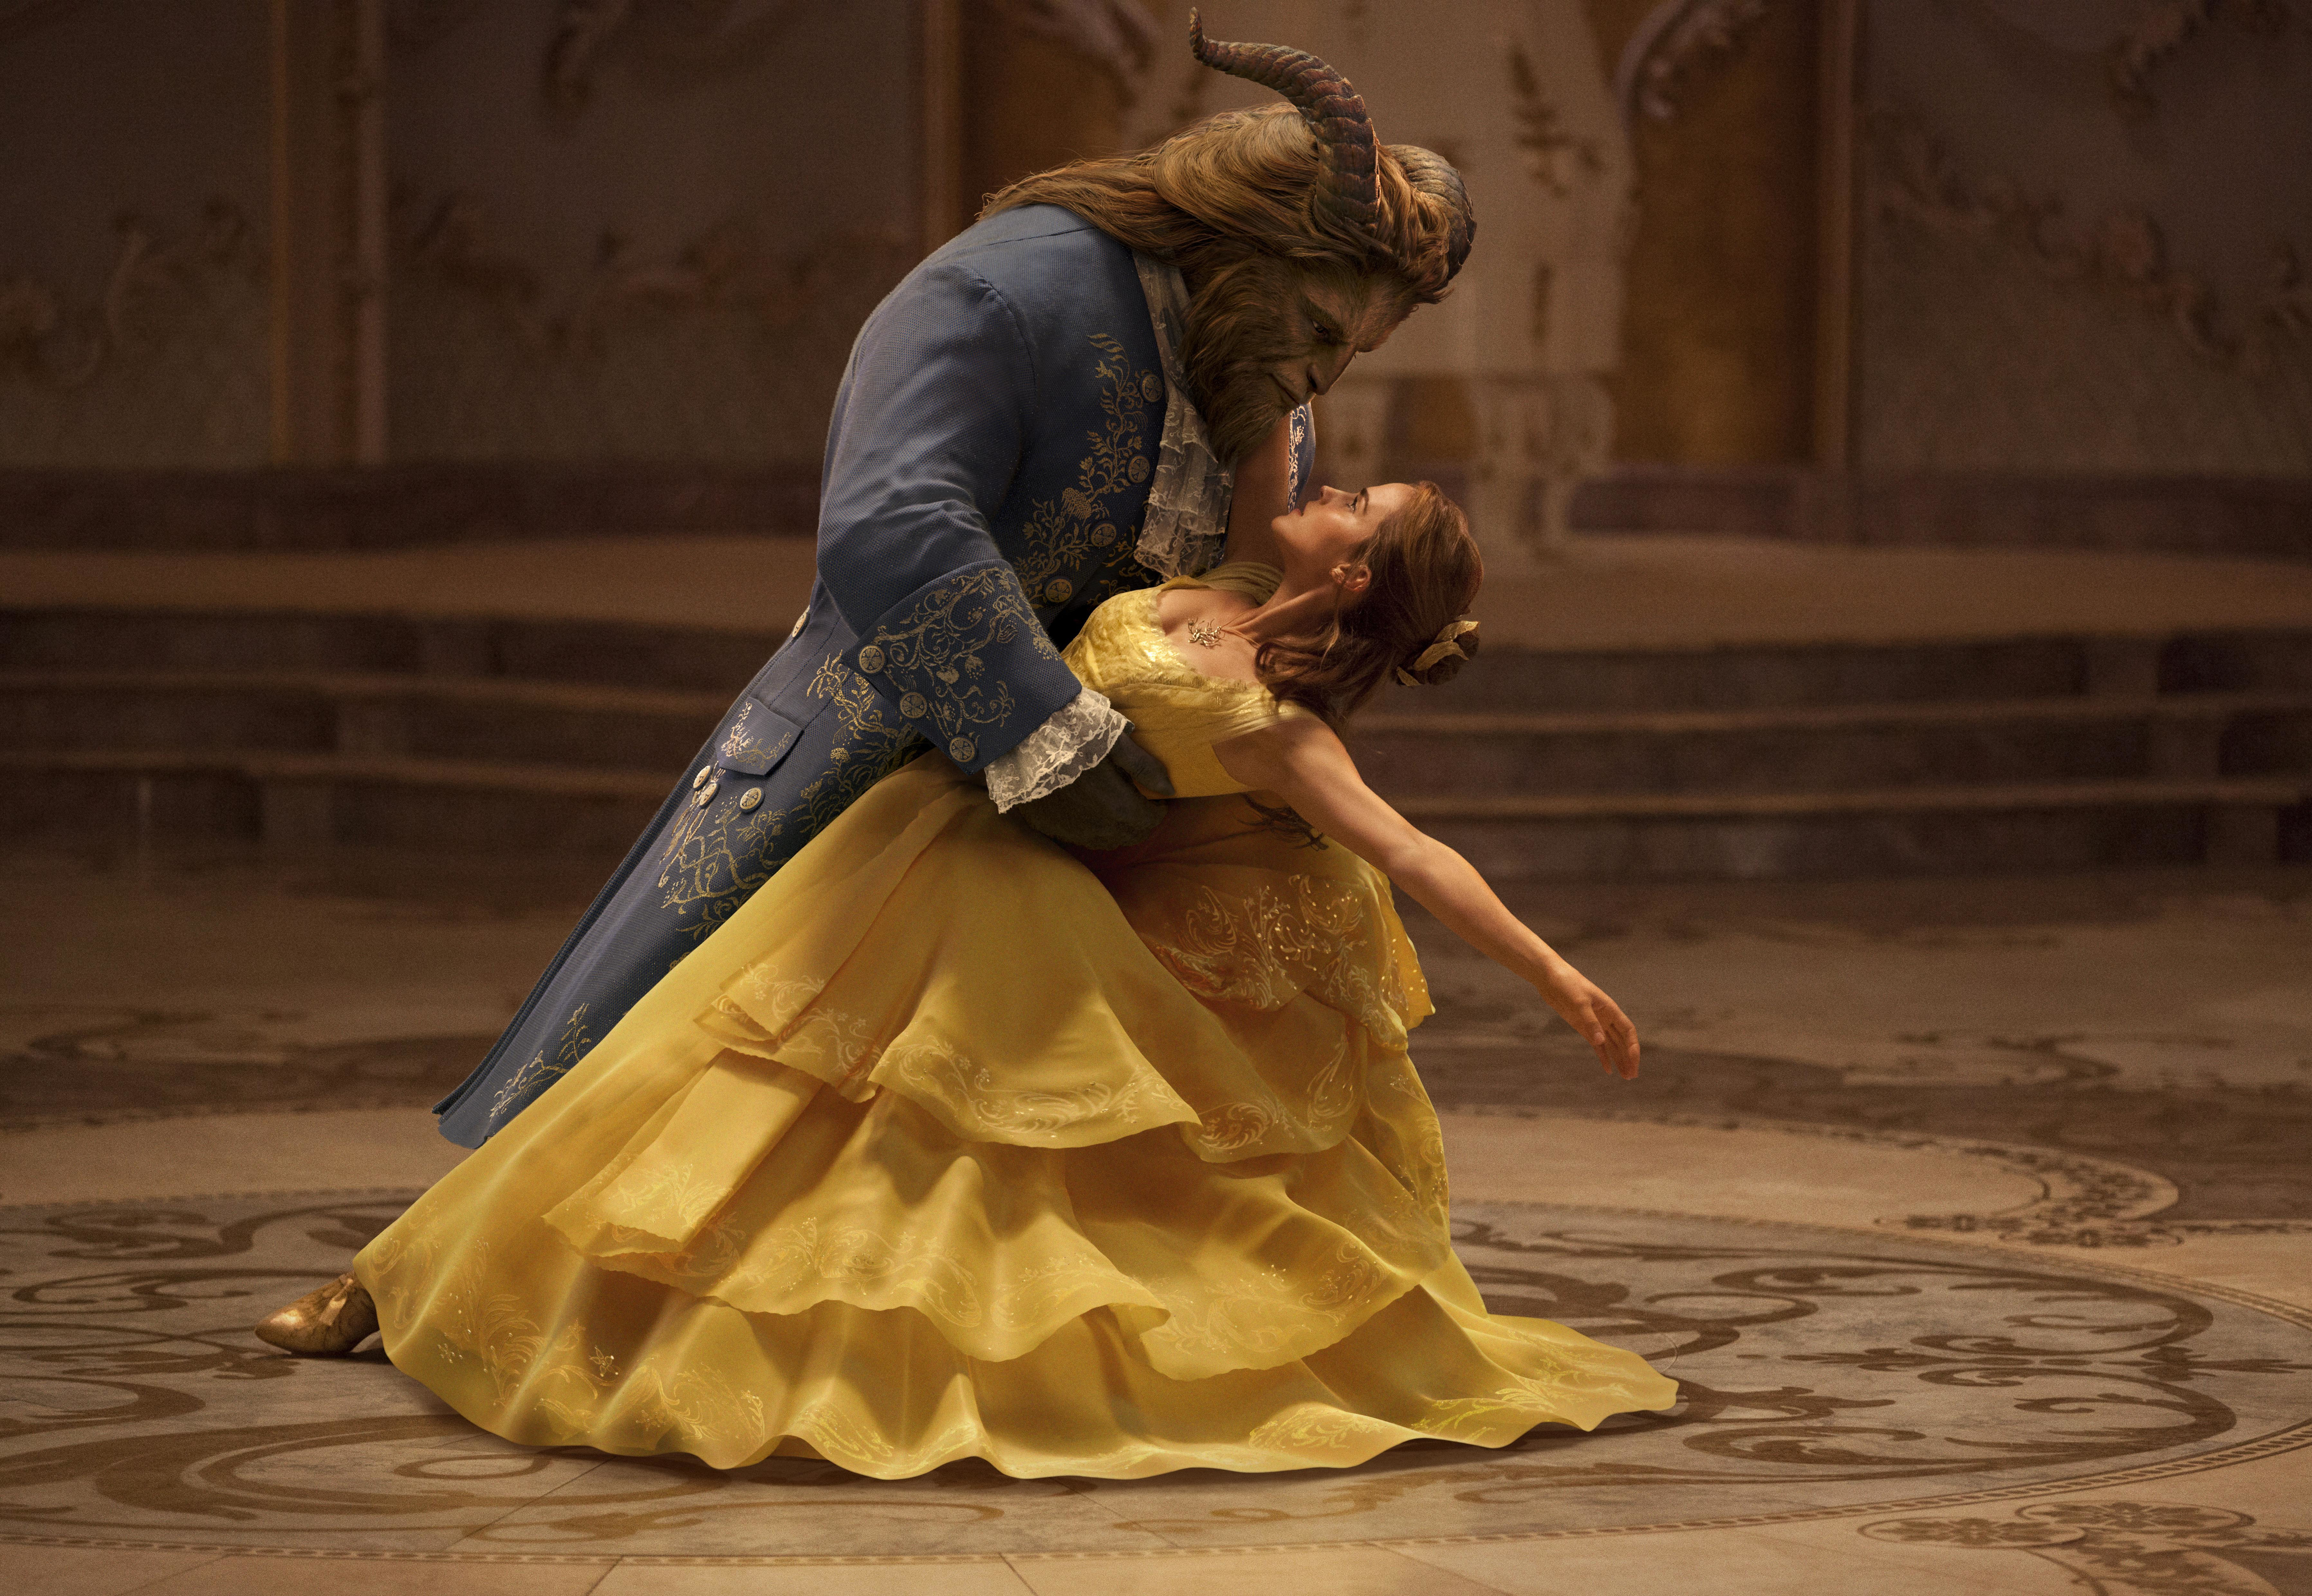 This image released by Disney shows Dan Stevens as The Beast, left, and Emma Watson as Belle in a live-action adaptation of the animated classic "Beauty and the Beast." (Disney via AP)